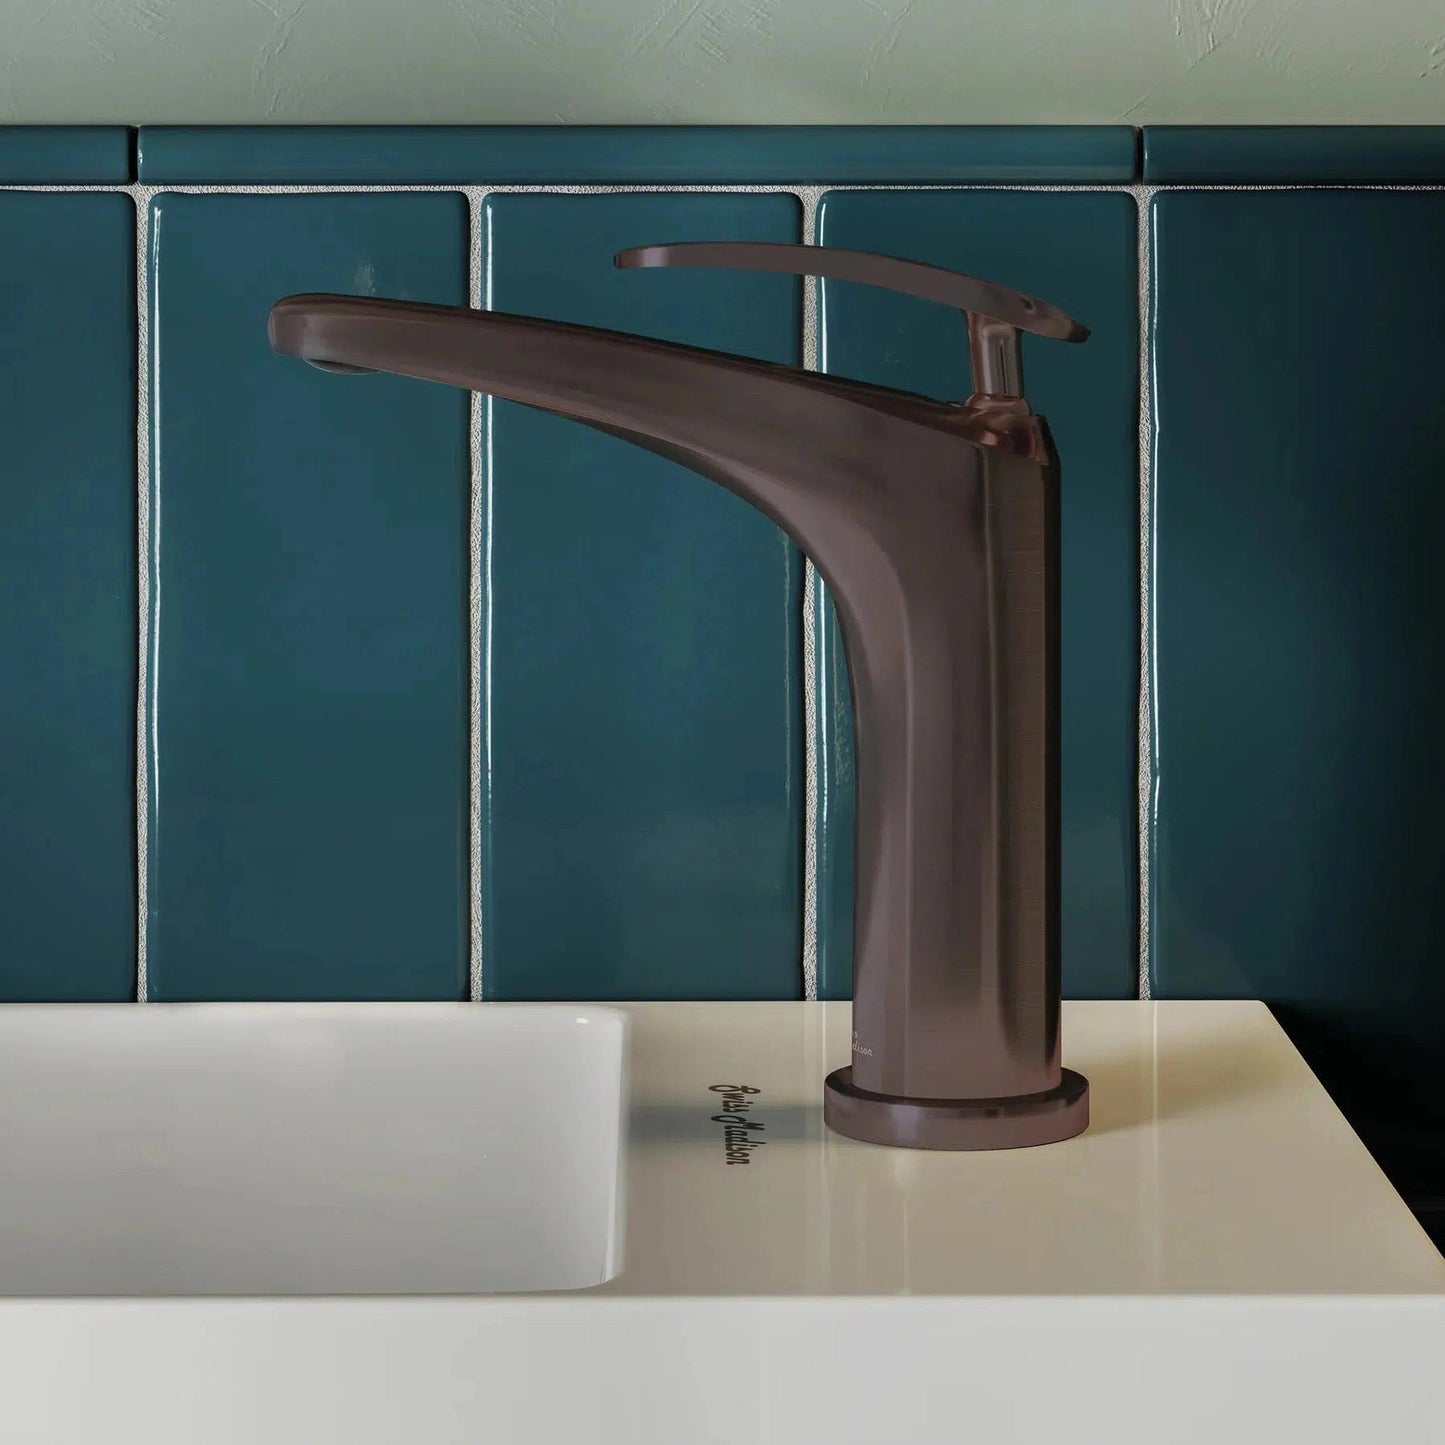 Swiss Madison Sublime 7" Oil Rubbed Bronze Single Hole Bathroom Faucet With Flow Rate of 1.2 GPM